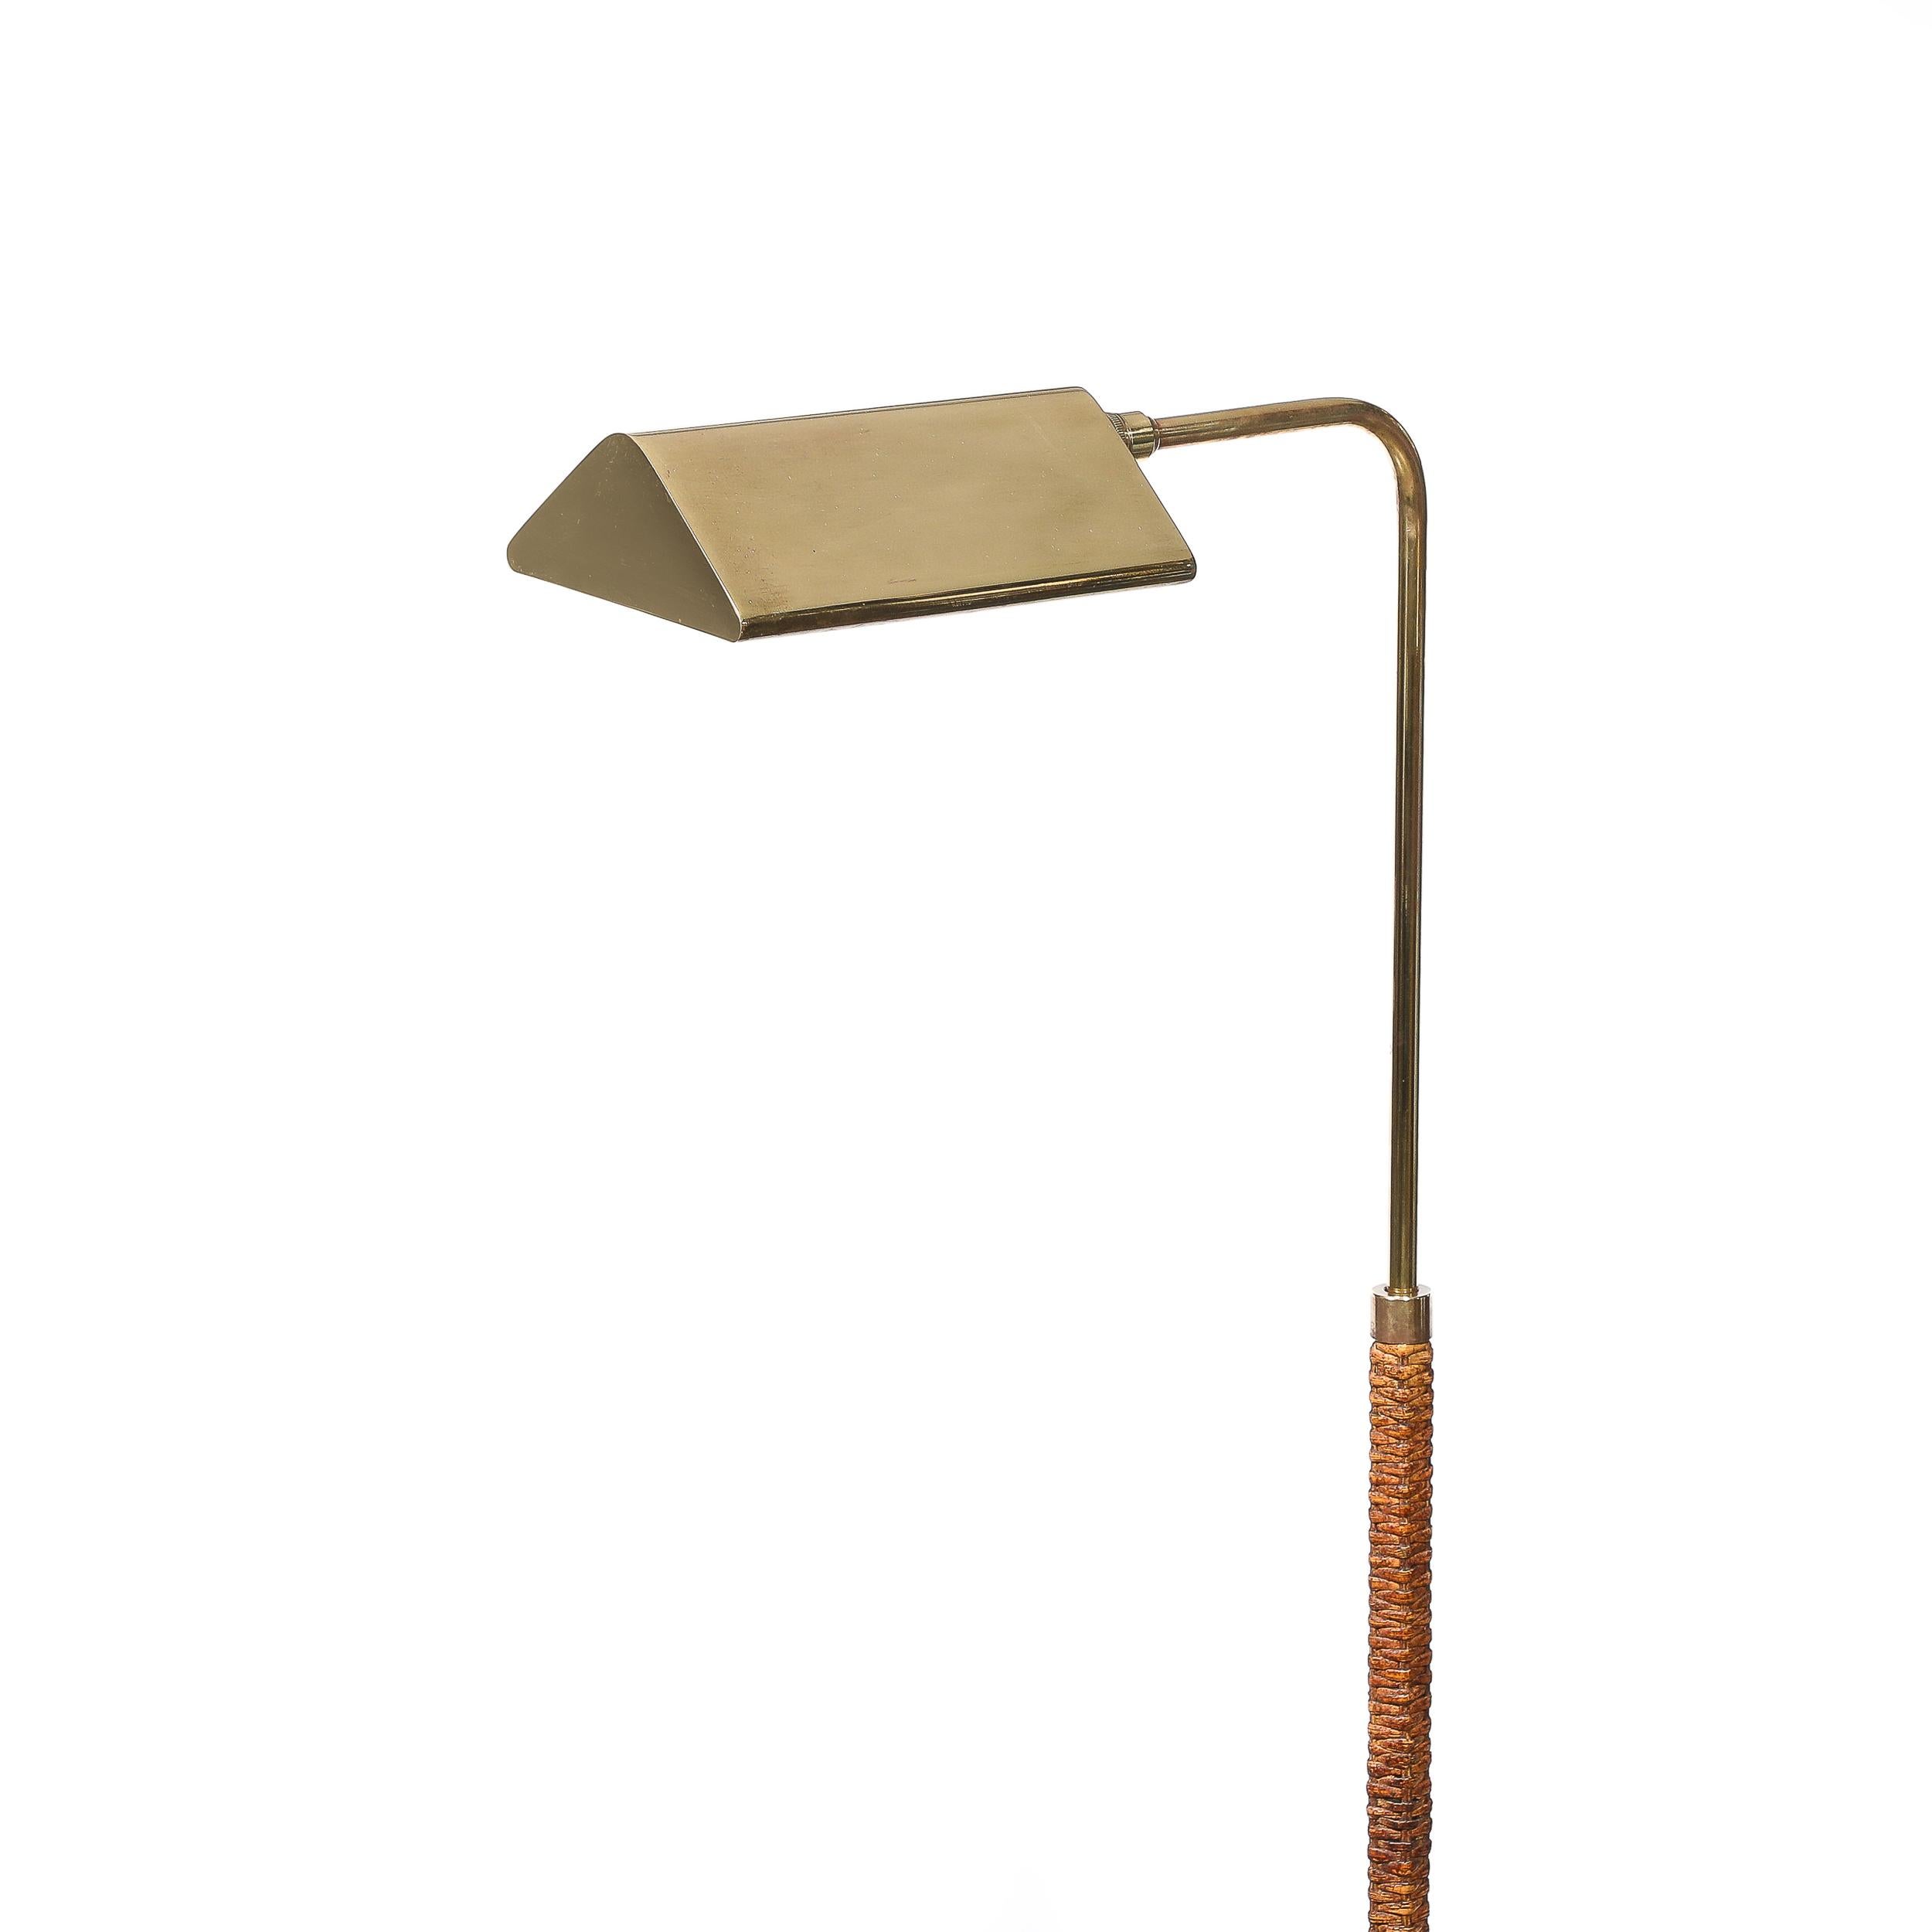 Late 20th Century Mid-Century Modernist Articulating Polished Brass and Ratan Wrapped Floor Lamp For Sale